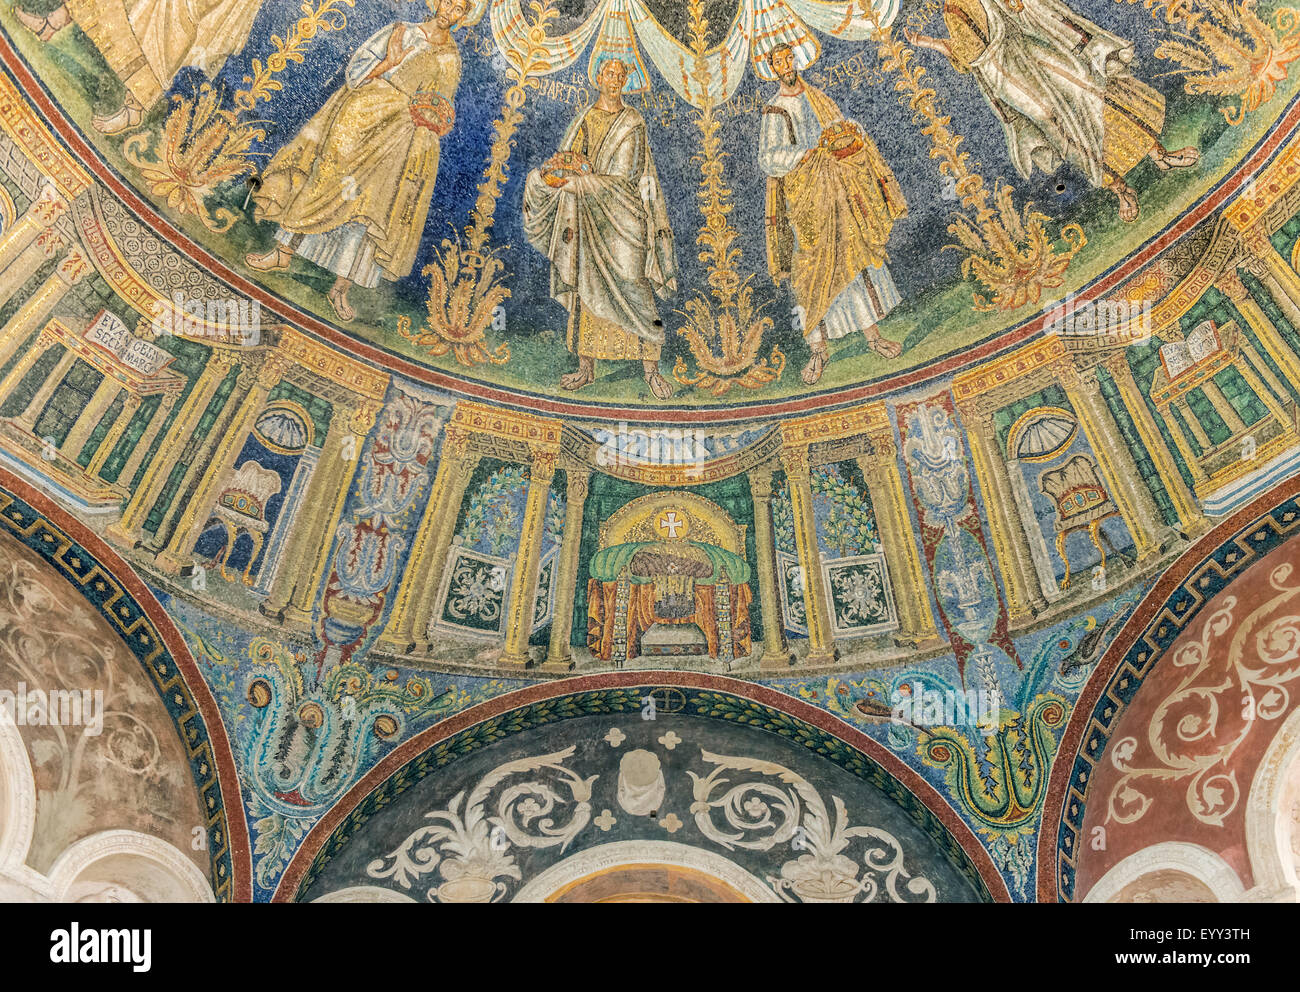 Tile mosaic in ornate dome in Neonian Baptistery, Ravenna, Ravenna, Italy Stock Photo